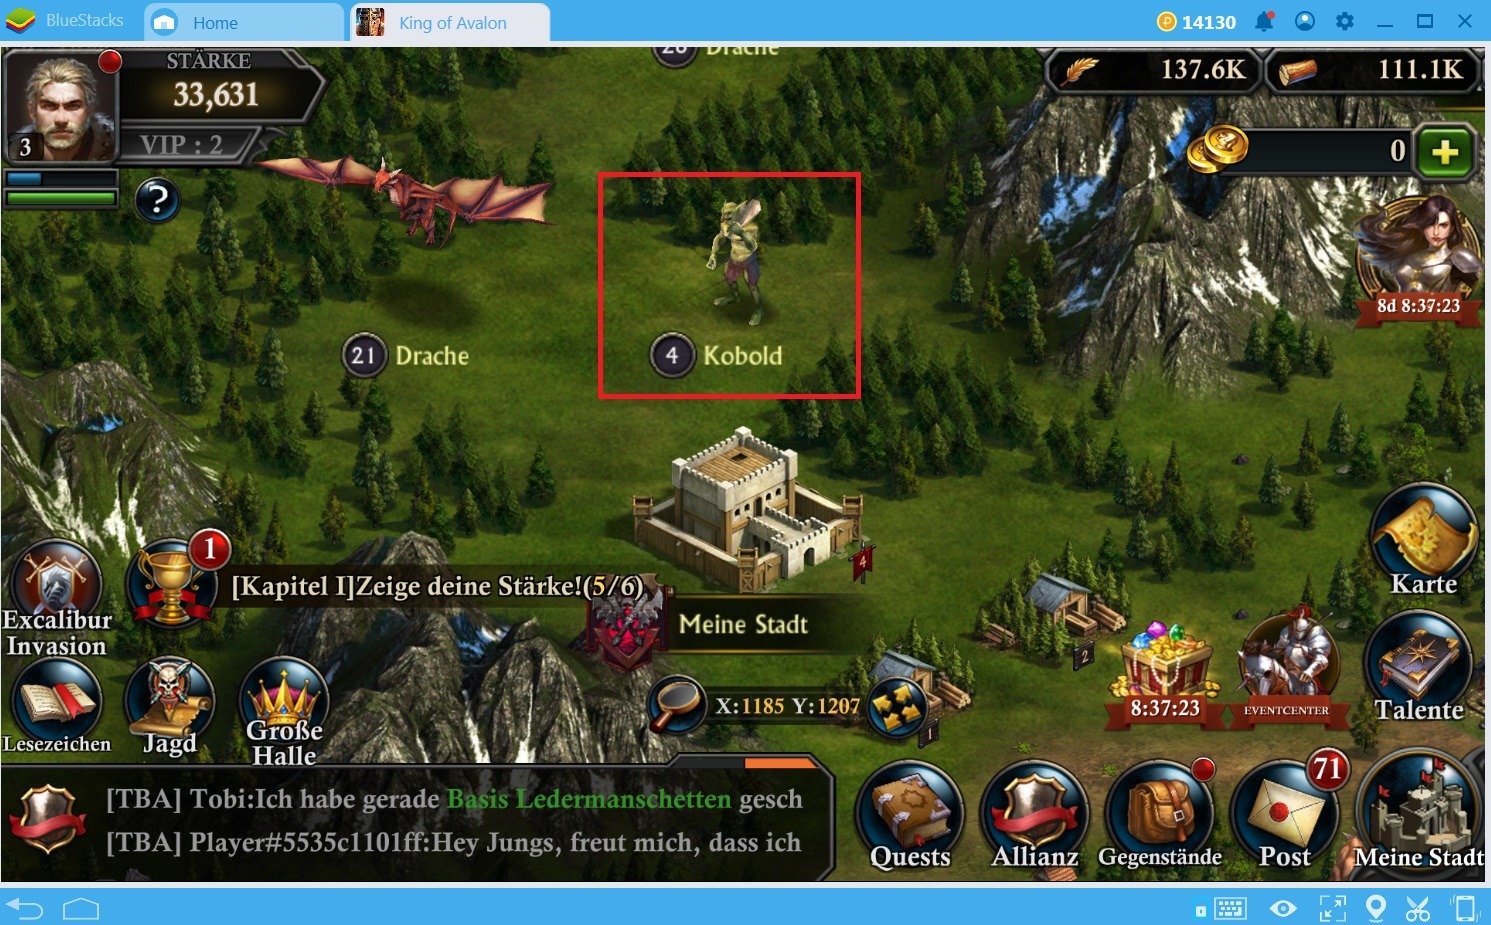 King of Avalon: Kampfguide